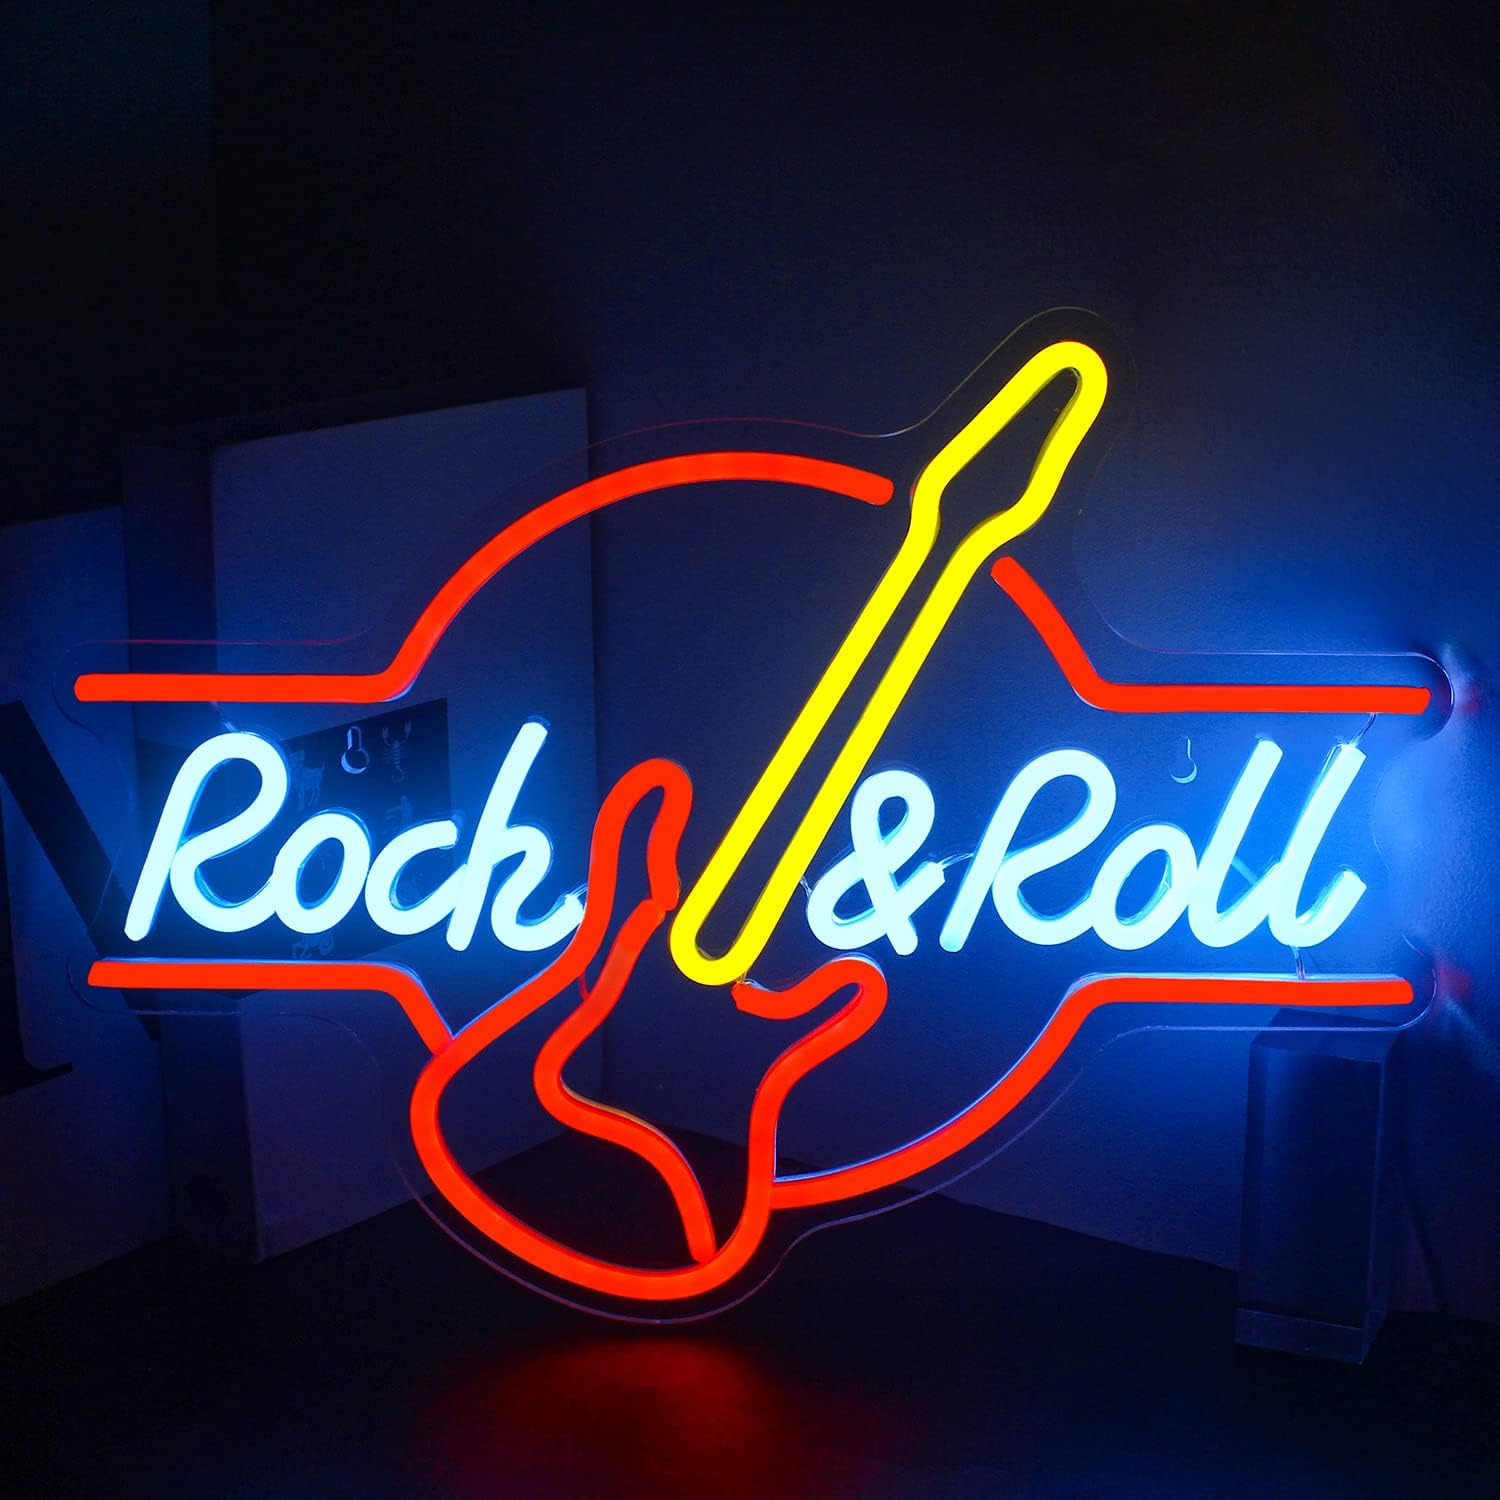 Guitar Rock and Roll Neon Signs, Led Neon Light for Wall,Neon Signs...